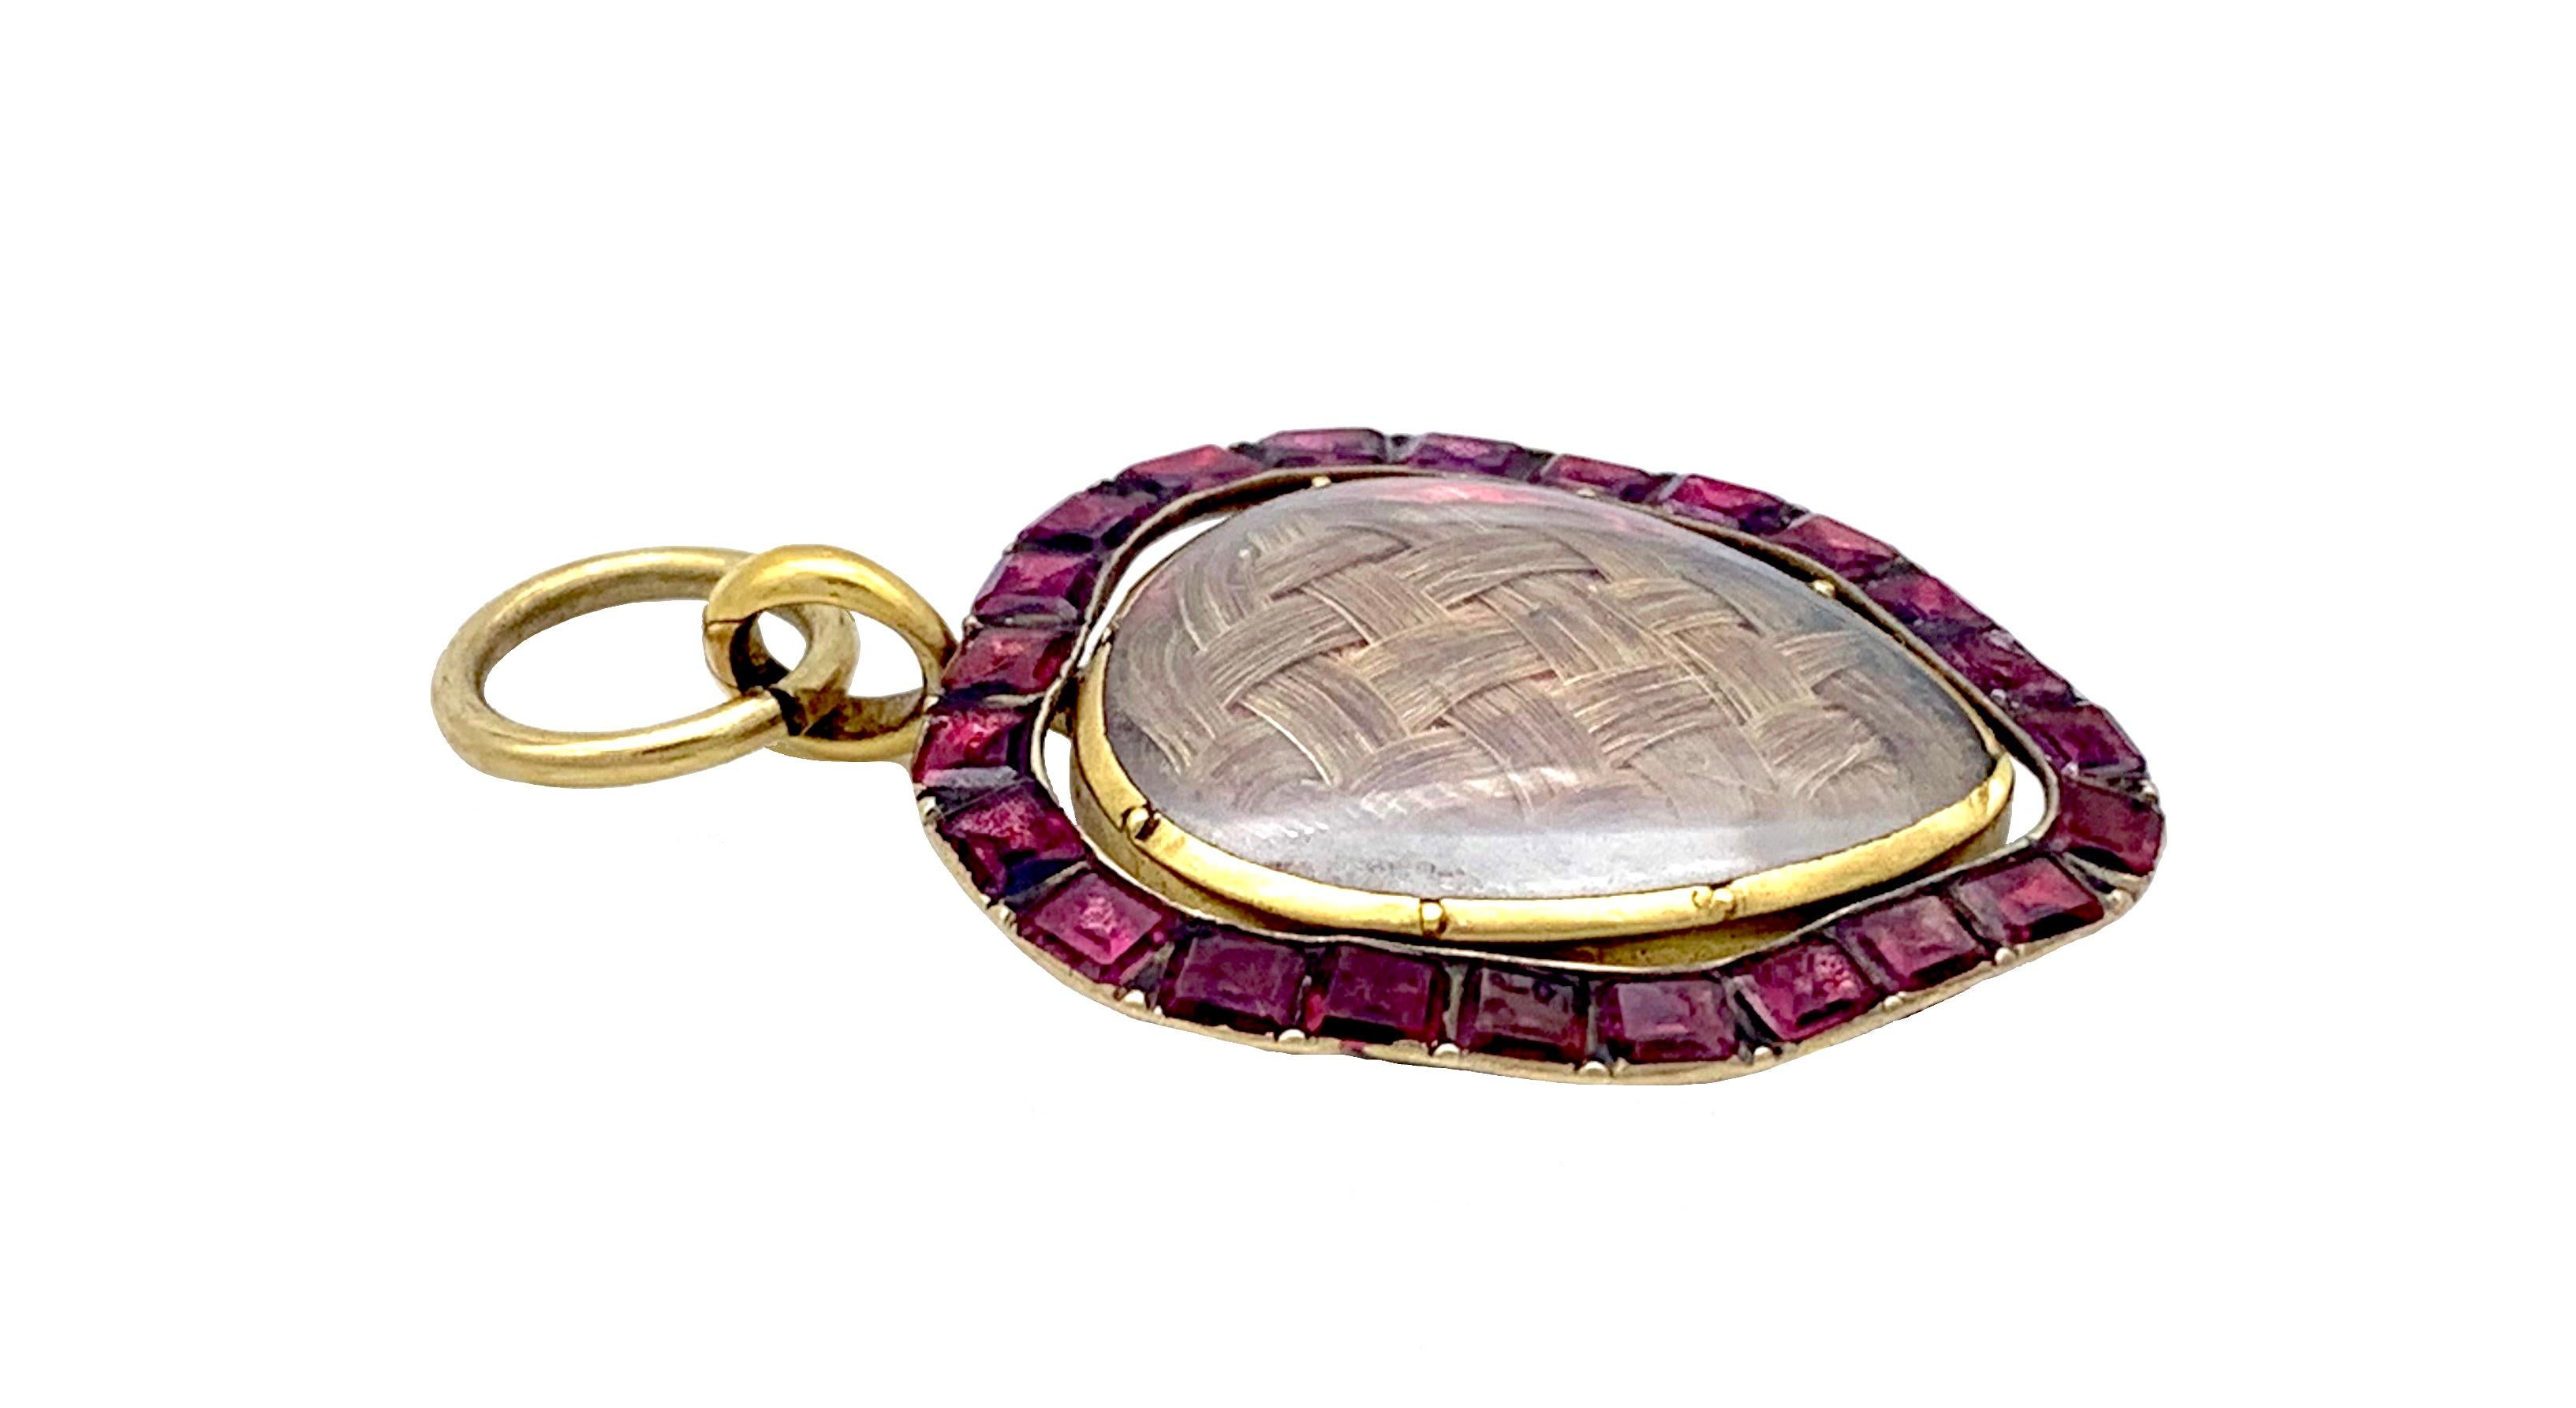 This beautiful heart pendant was hand crafted in the second half of the 18th Century. Within a heart shaped frame hand crafted out of gold and set with flat cut rectangular garnets we see an inner heart locket containing beautifully woven heart,